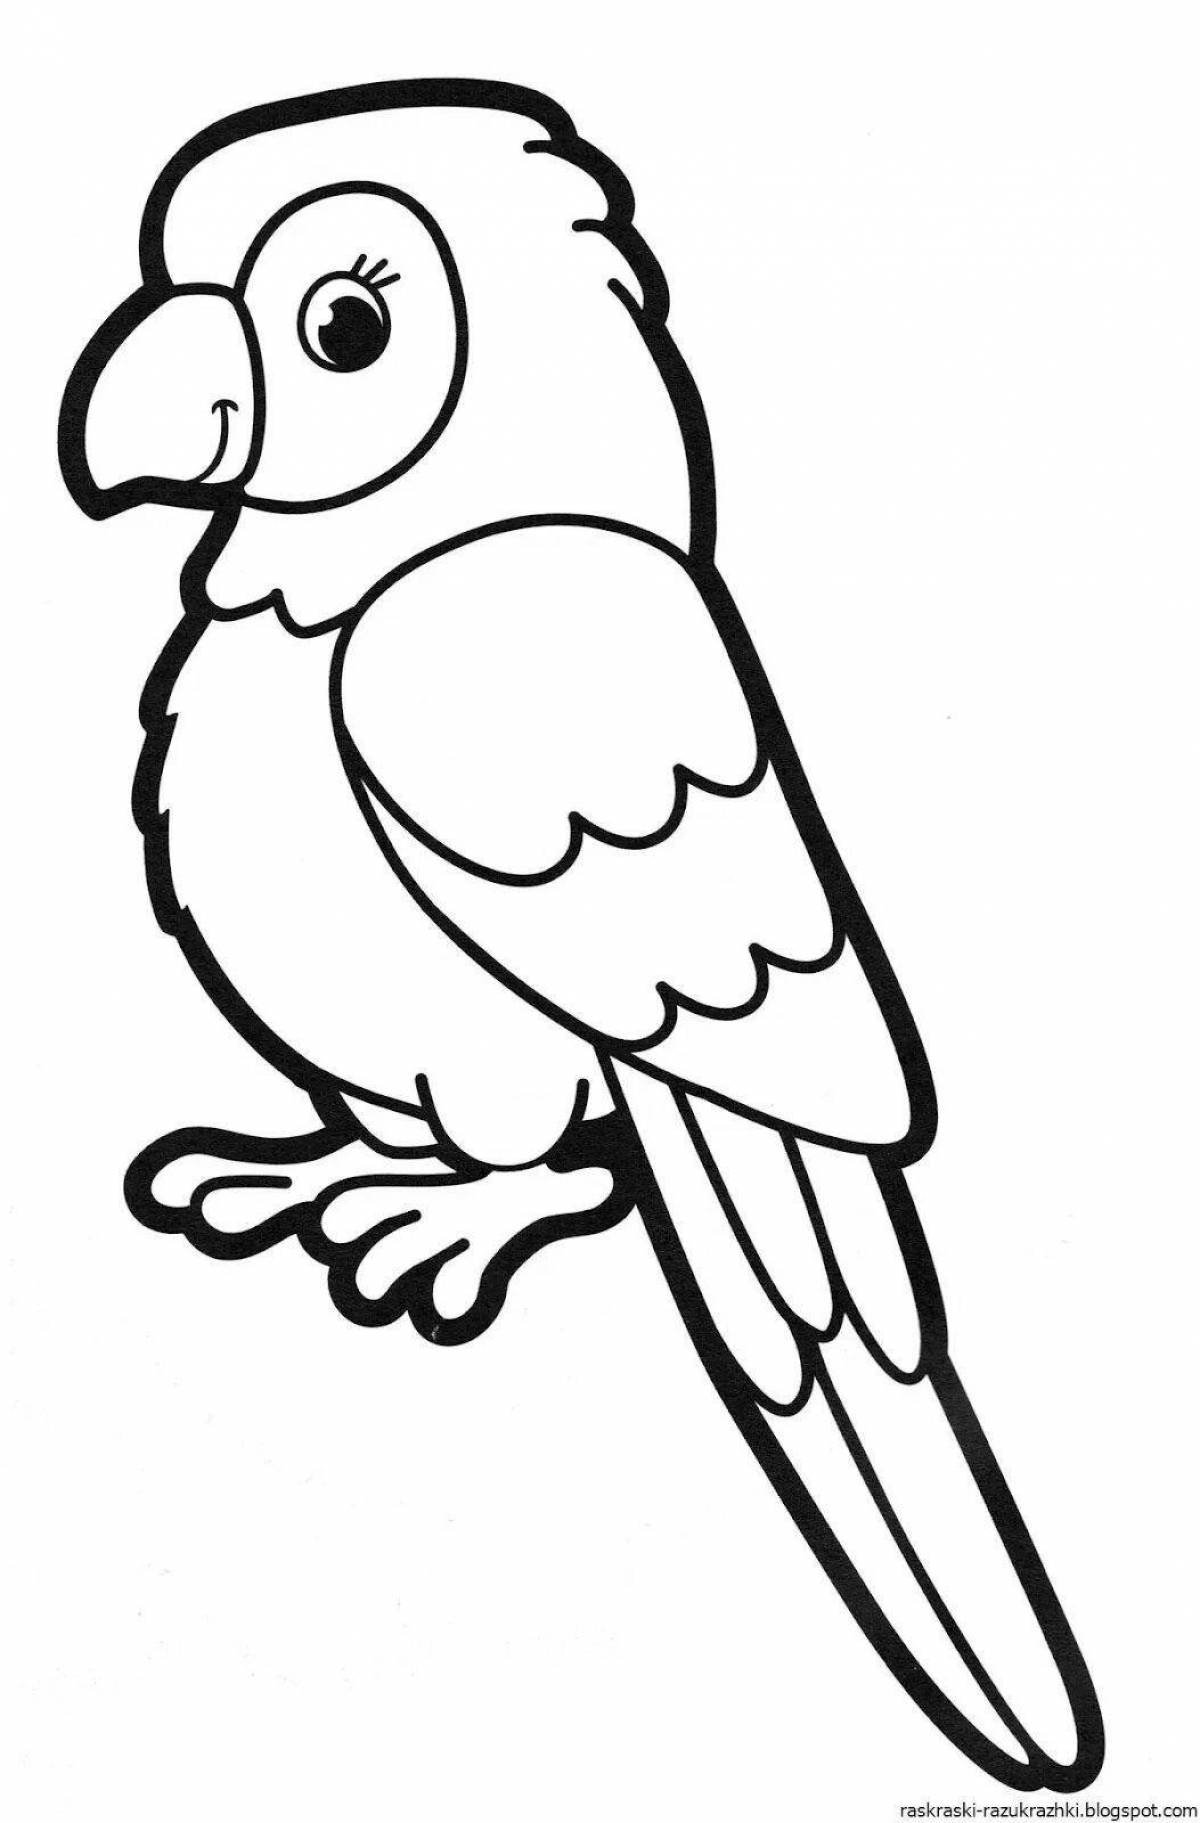 Outline coloring page for children 3-4 years old